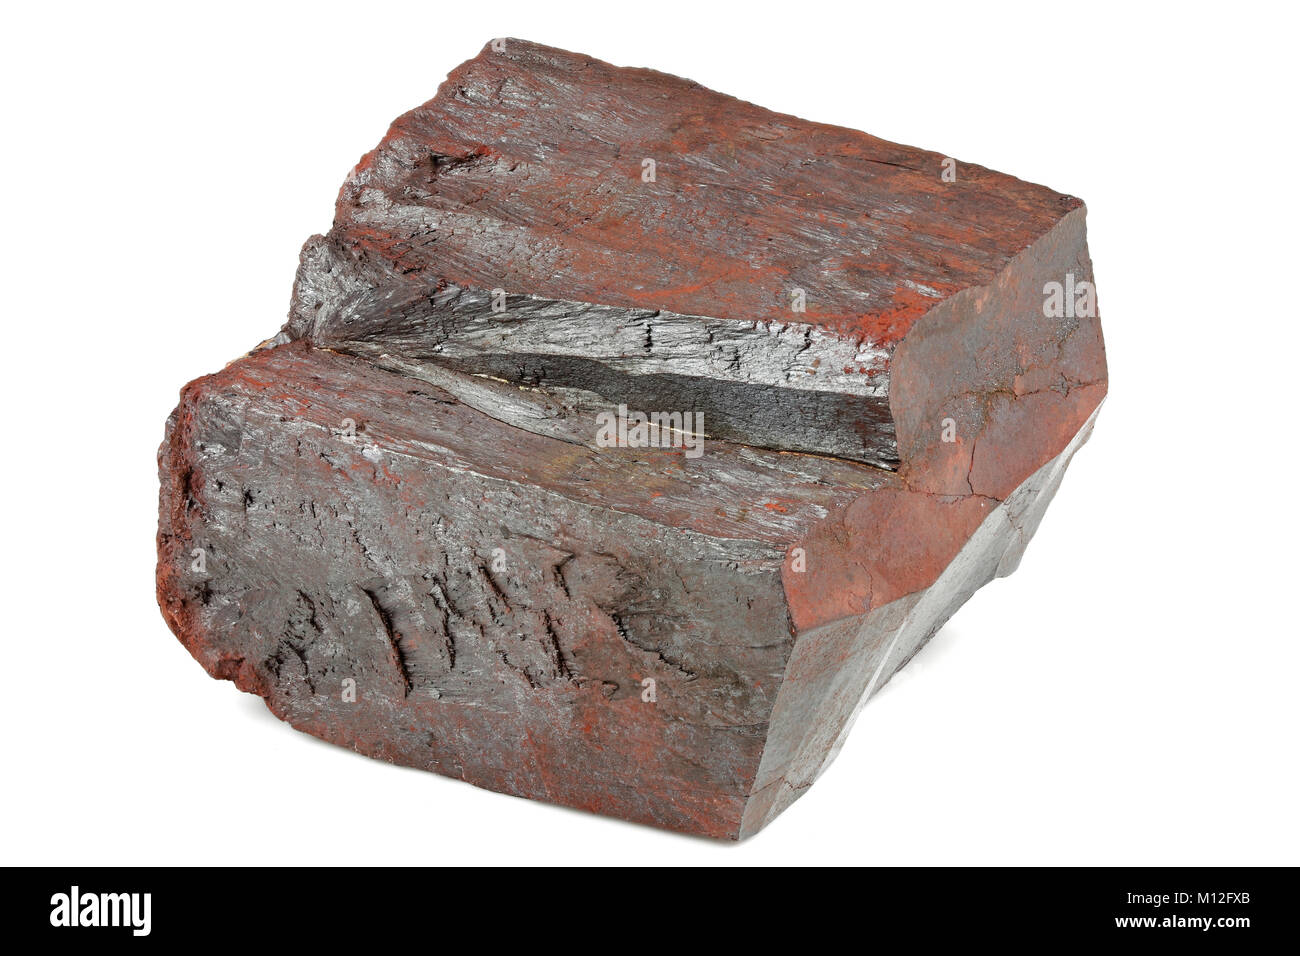 hematite (iron ore) from Morocco isolated on white background Stock Photo